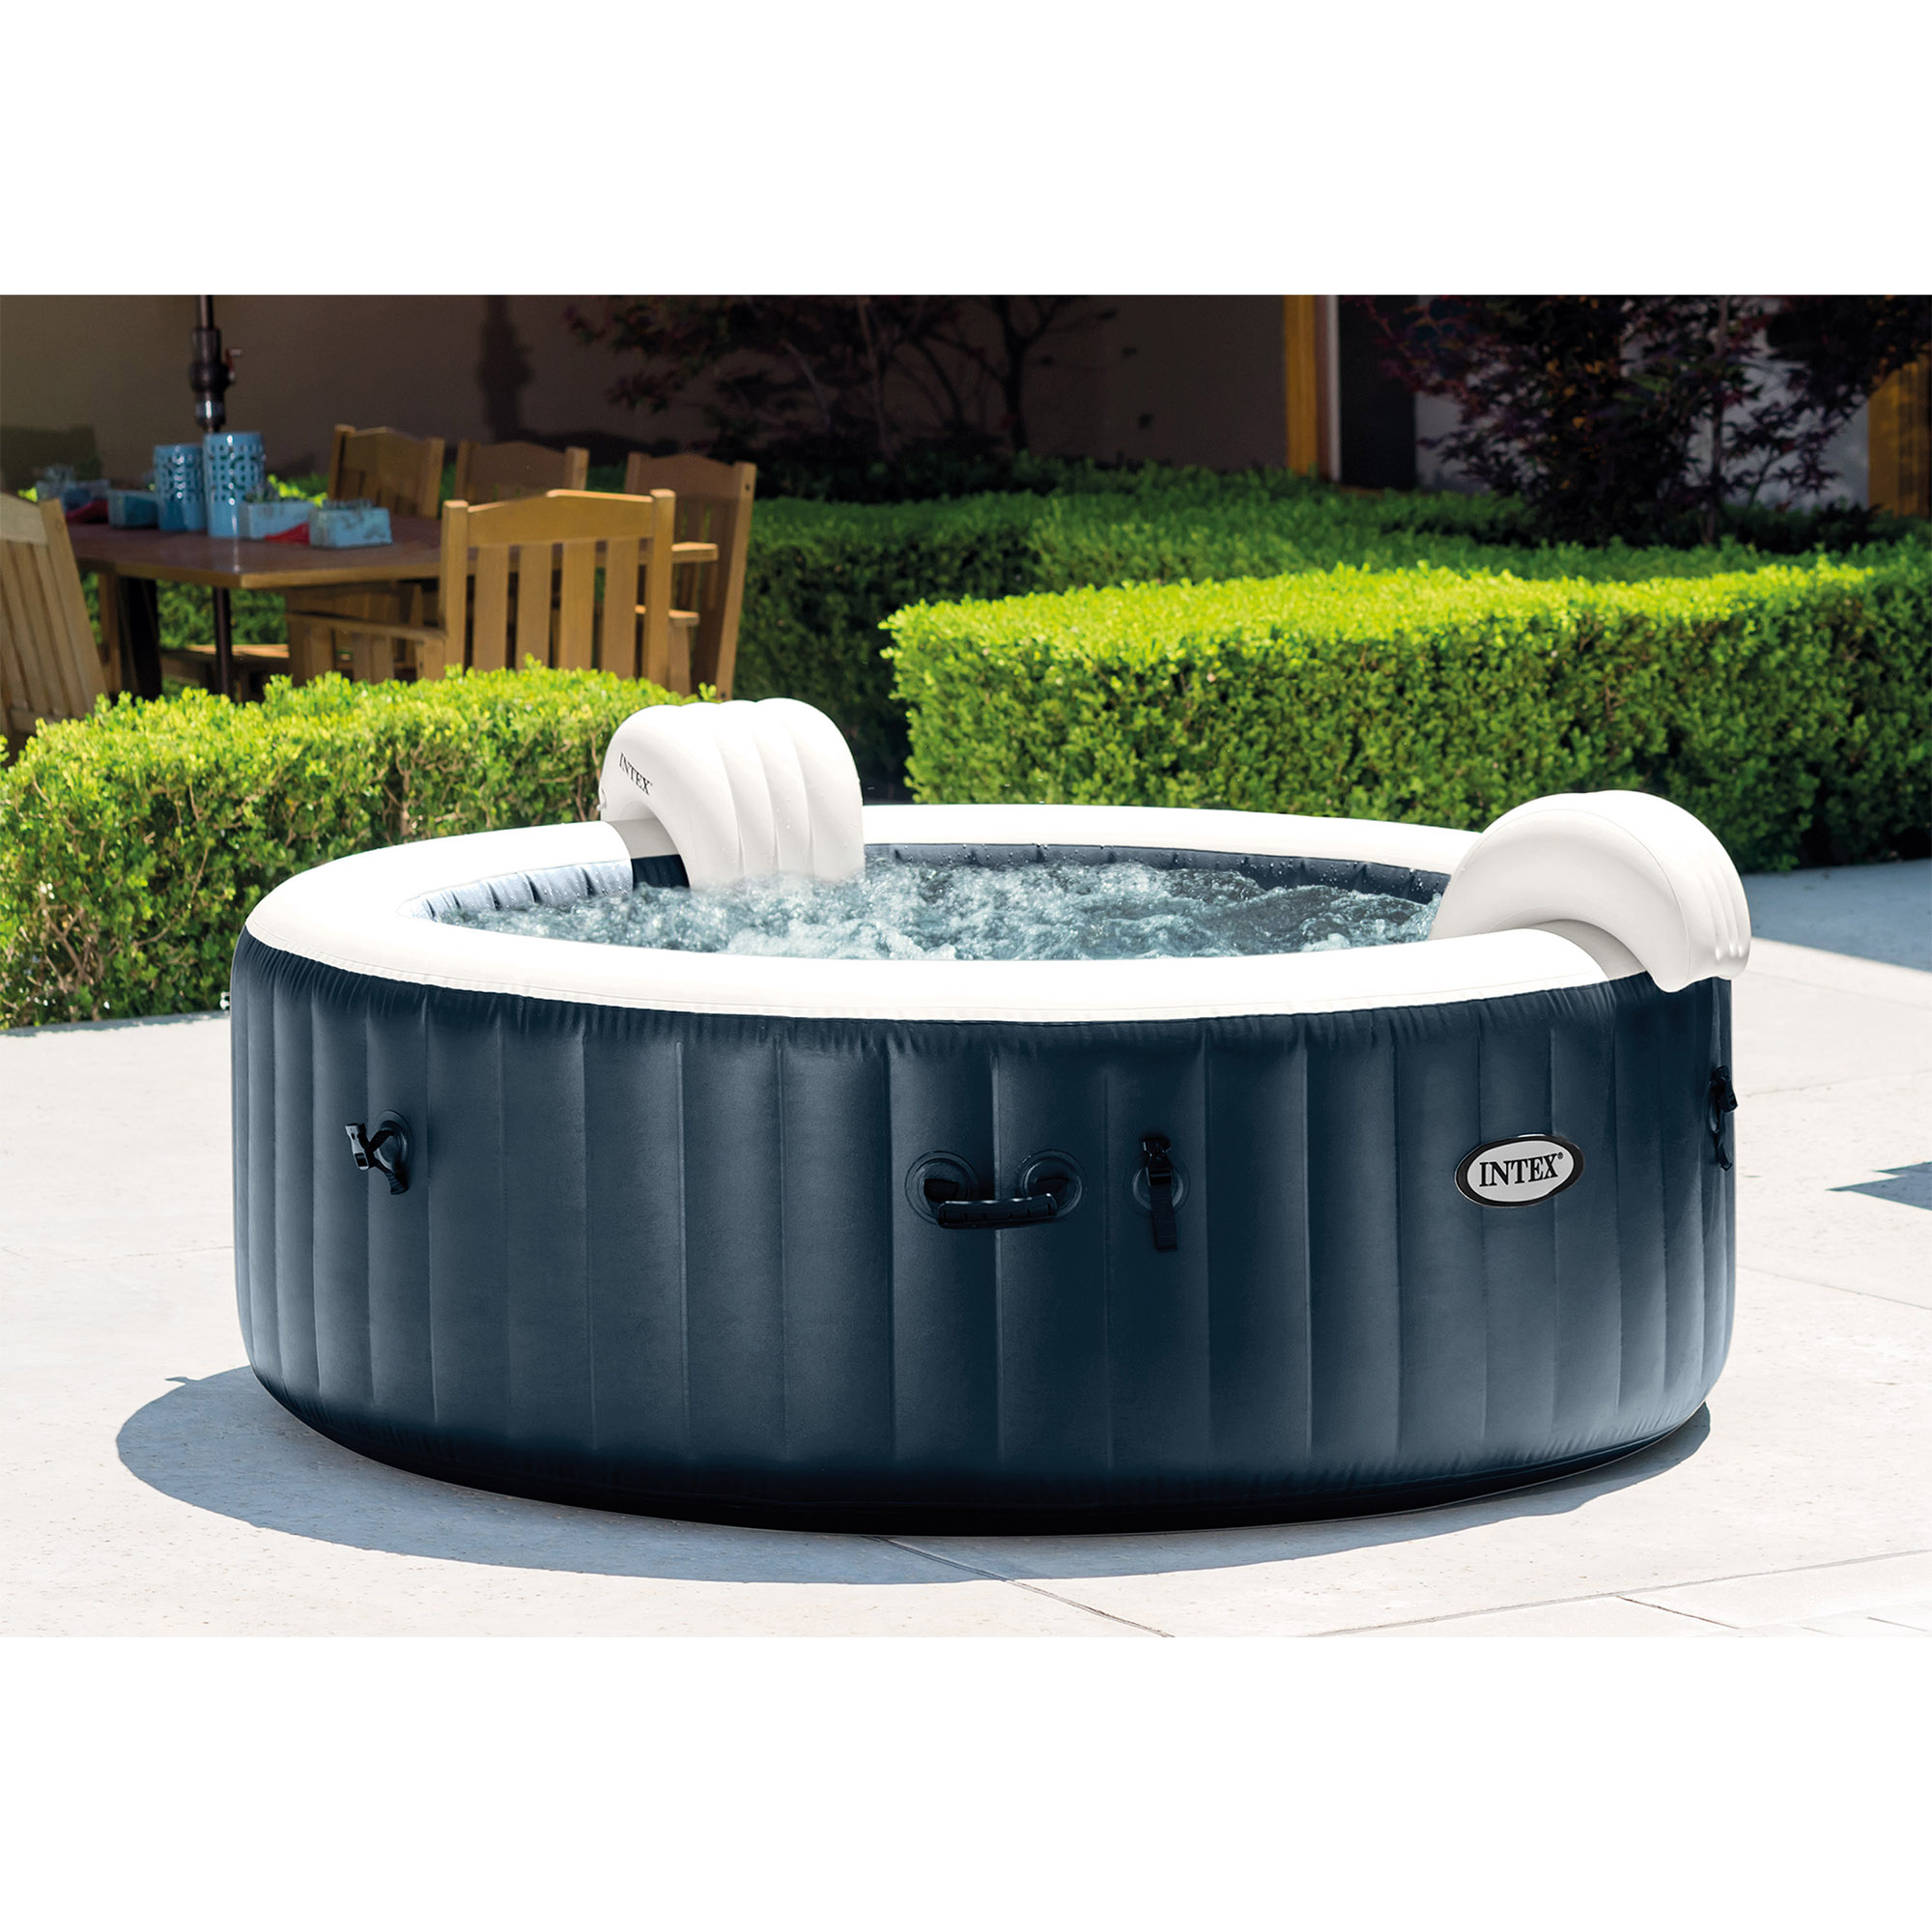 Intex PureSpa Plus 6 Person Inflatable Hot Tub Bubble Jet Spa w/ 2 Seats, Navy - image 4 of 12